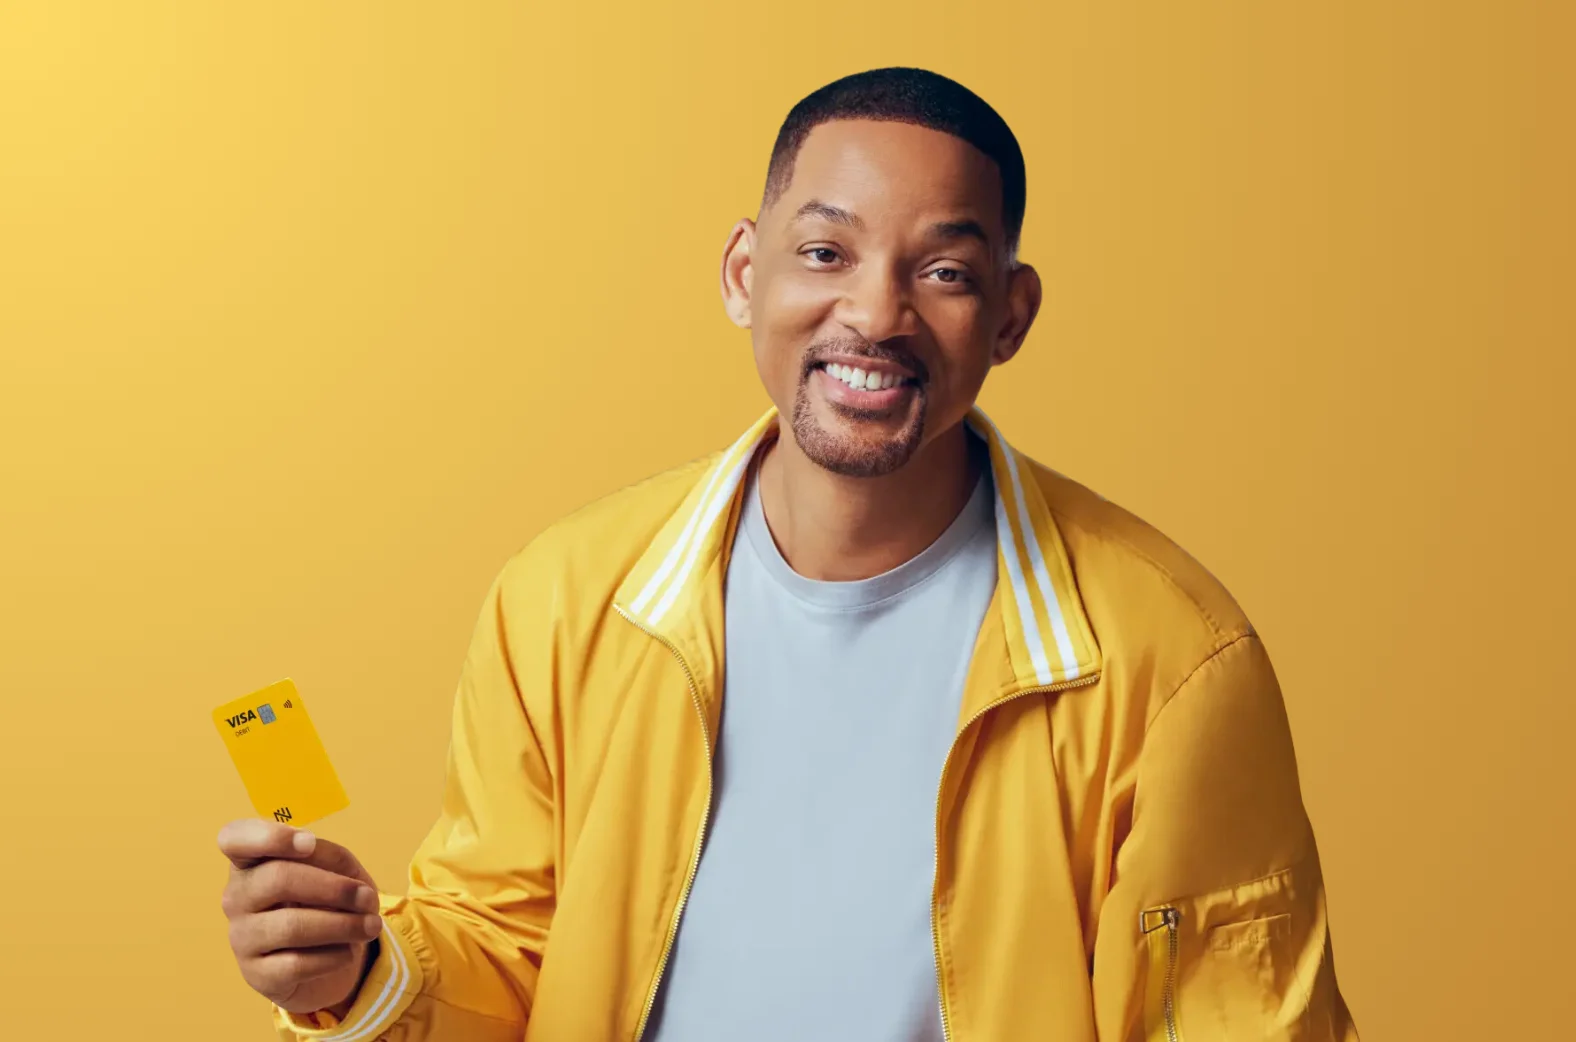 Smiling man in a yellow jacket holding a yellow Visa card against a yellow background.